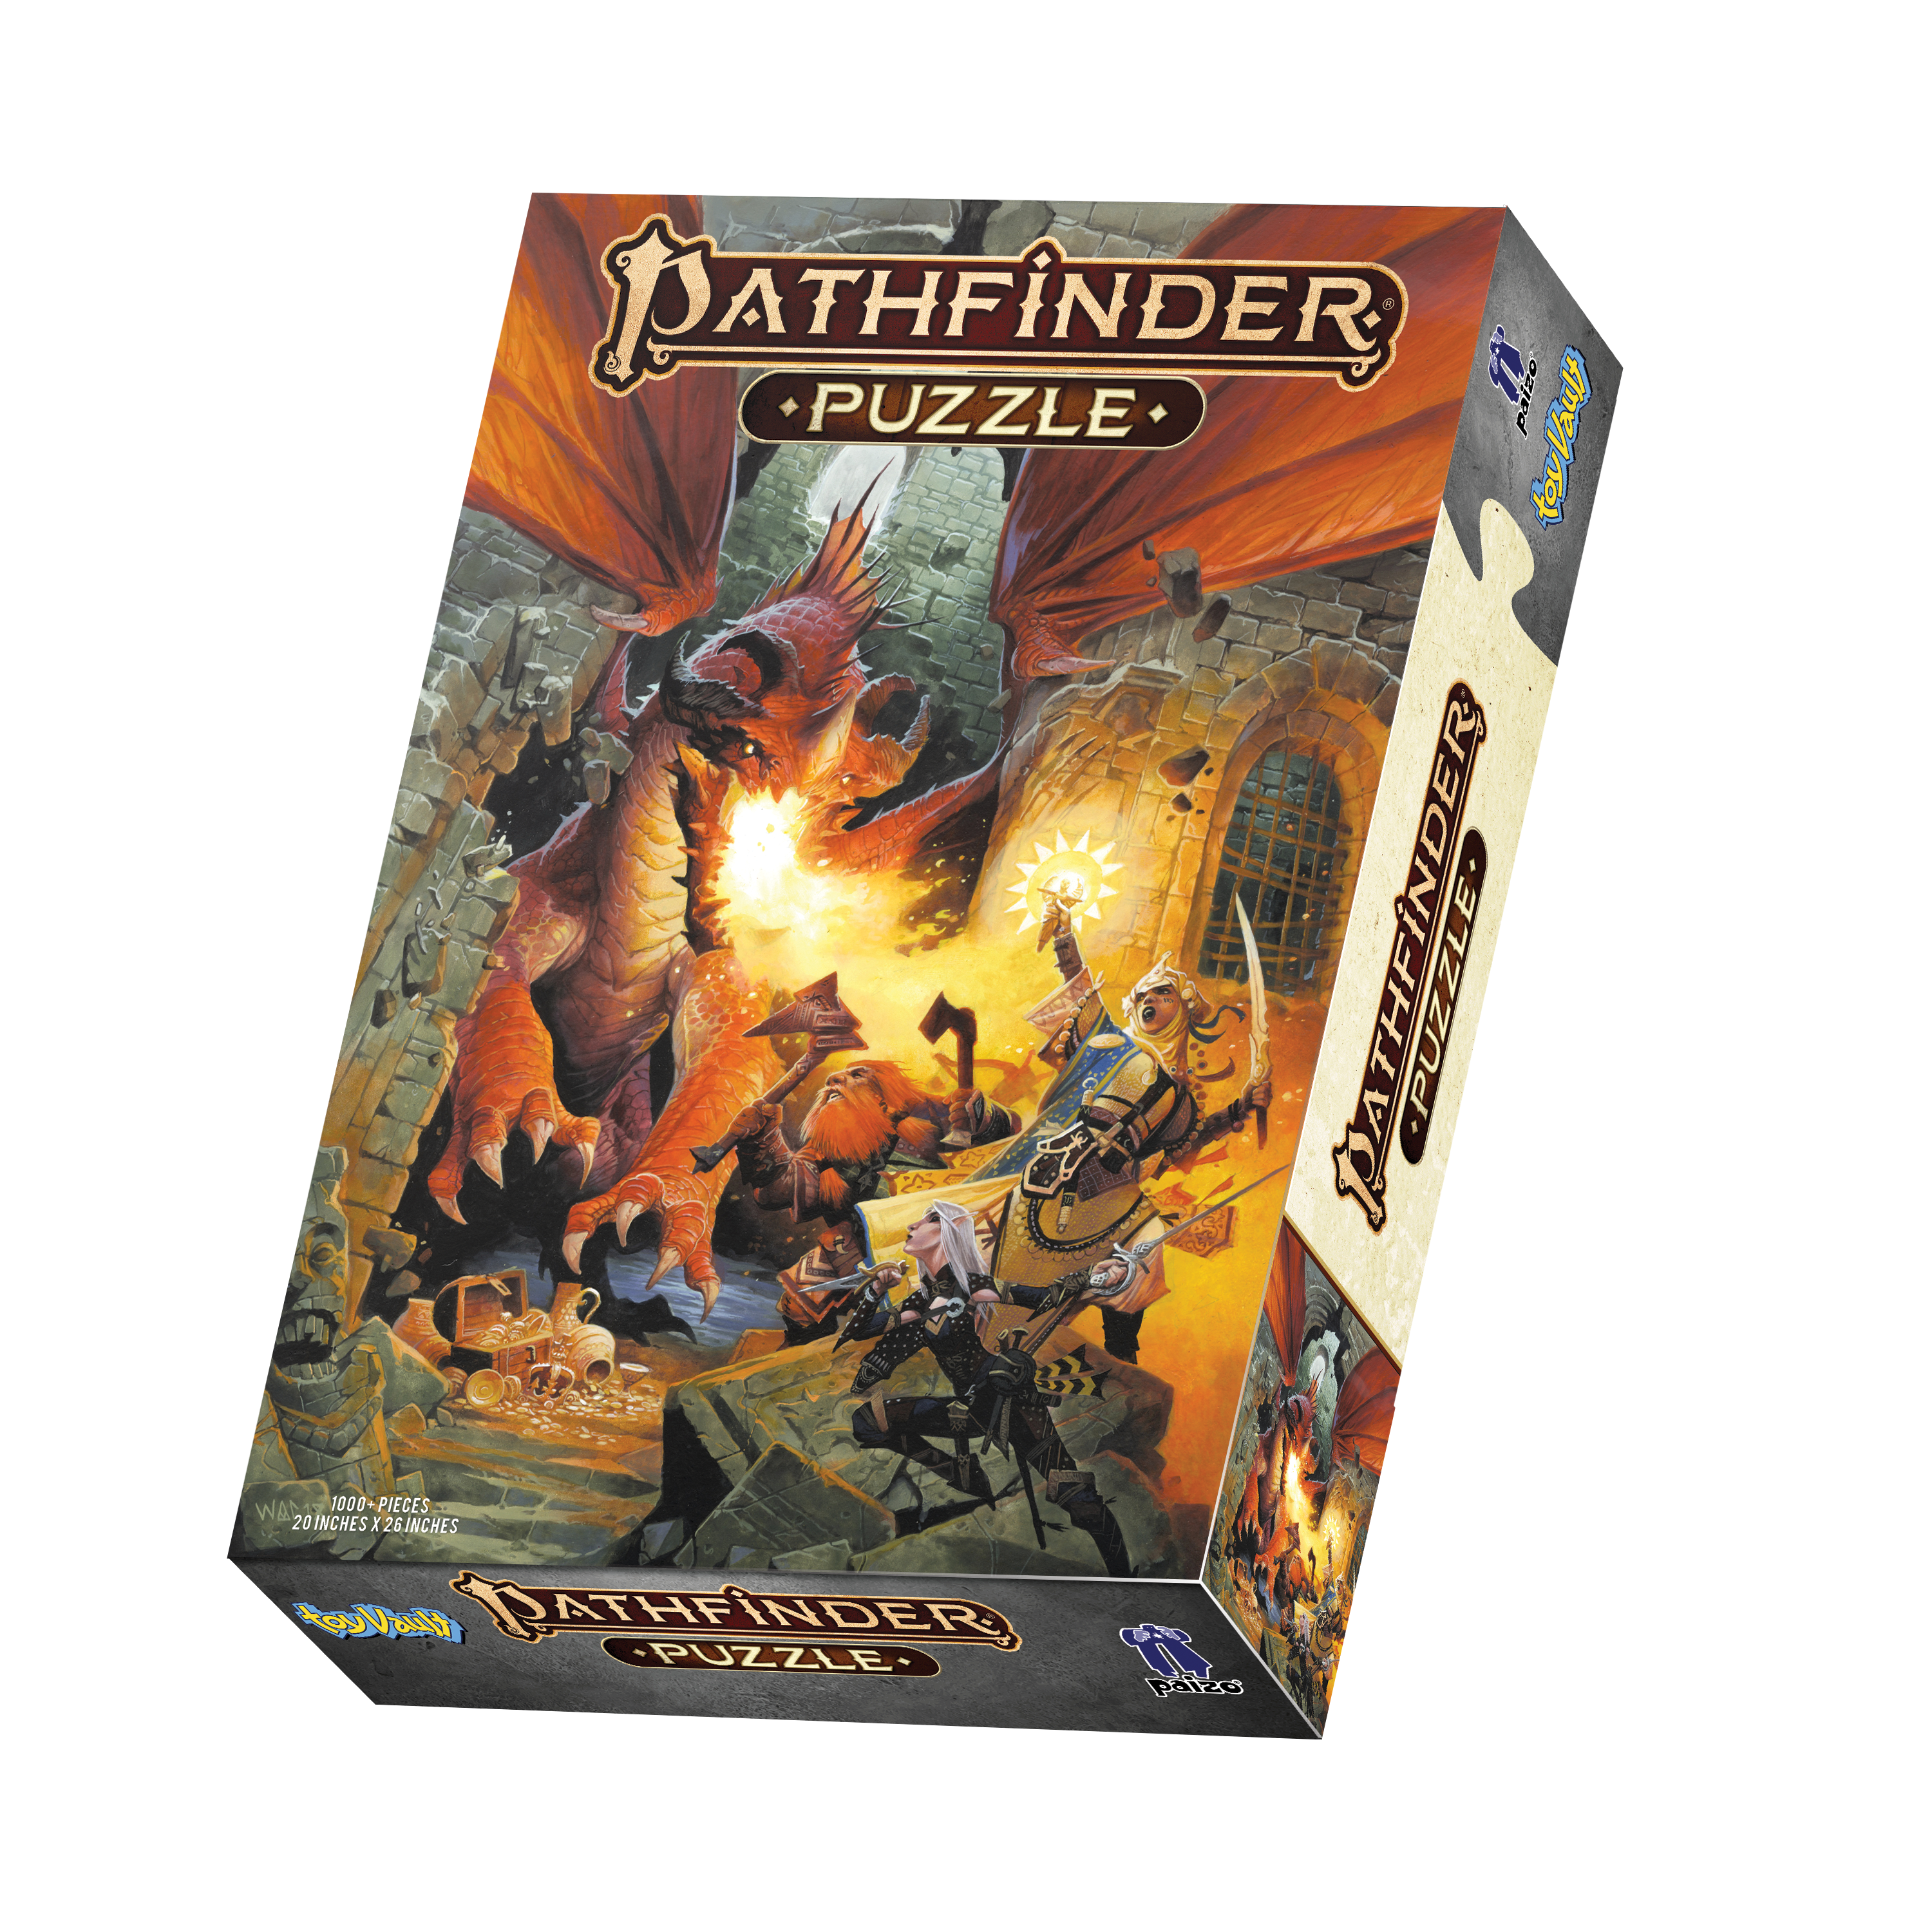 Pathfinder Game Puzzle: Core Rulebook, 1000-Piece Jigsaw 20 x 26 Inch